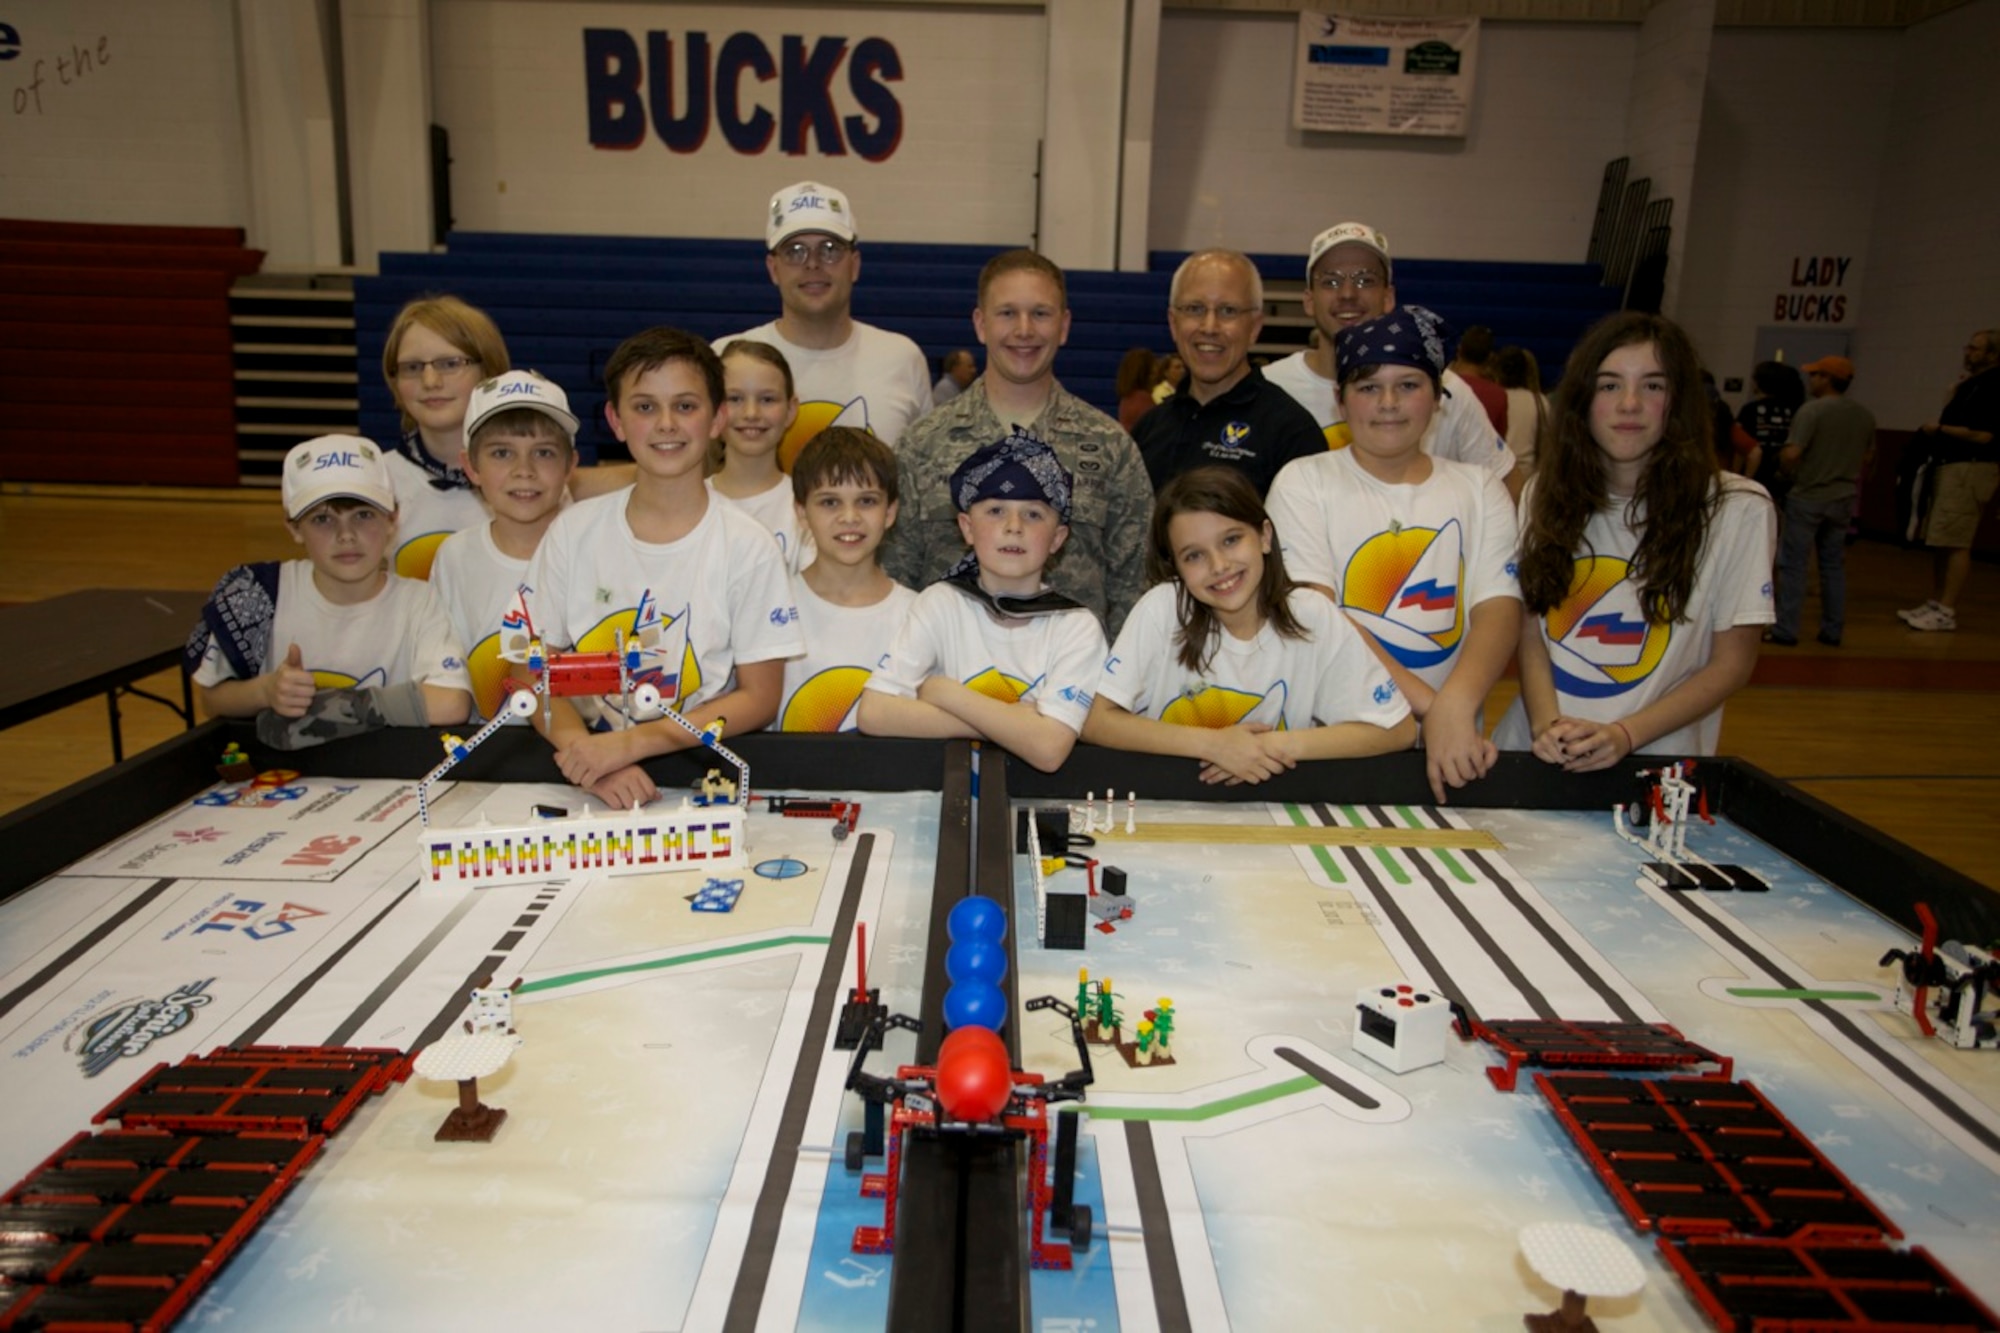 PANAMA CITY, Fla. -- Air Force Civil Engineer Center engineers 2nd Lt. William Page and Bryan Muller (back row, 2nd and 3rd from left), pose with teams from the Panama City, Fla., Science and Discovery Center during the First Lego League robotics competition Jan. 12, 2013. Page and Muller, both assigned to Tyndall Air Force Base, Fla., were judges for the robot design portion of the competition. (U.S. Air Force photo/Eddie Green)